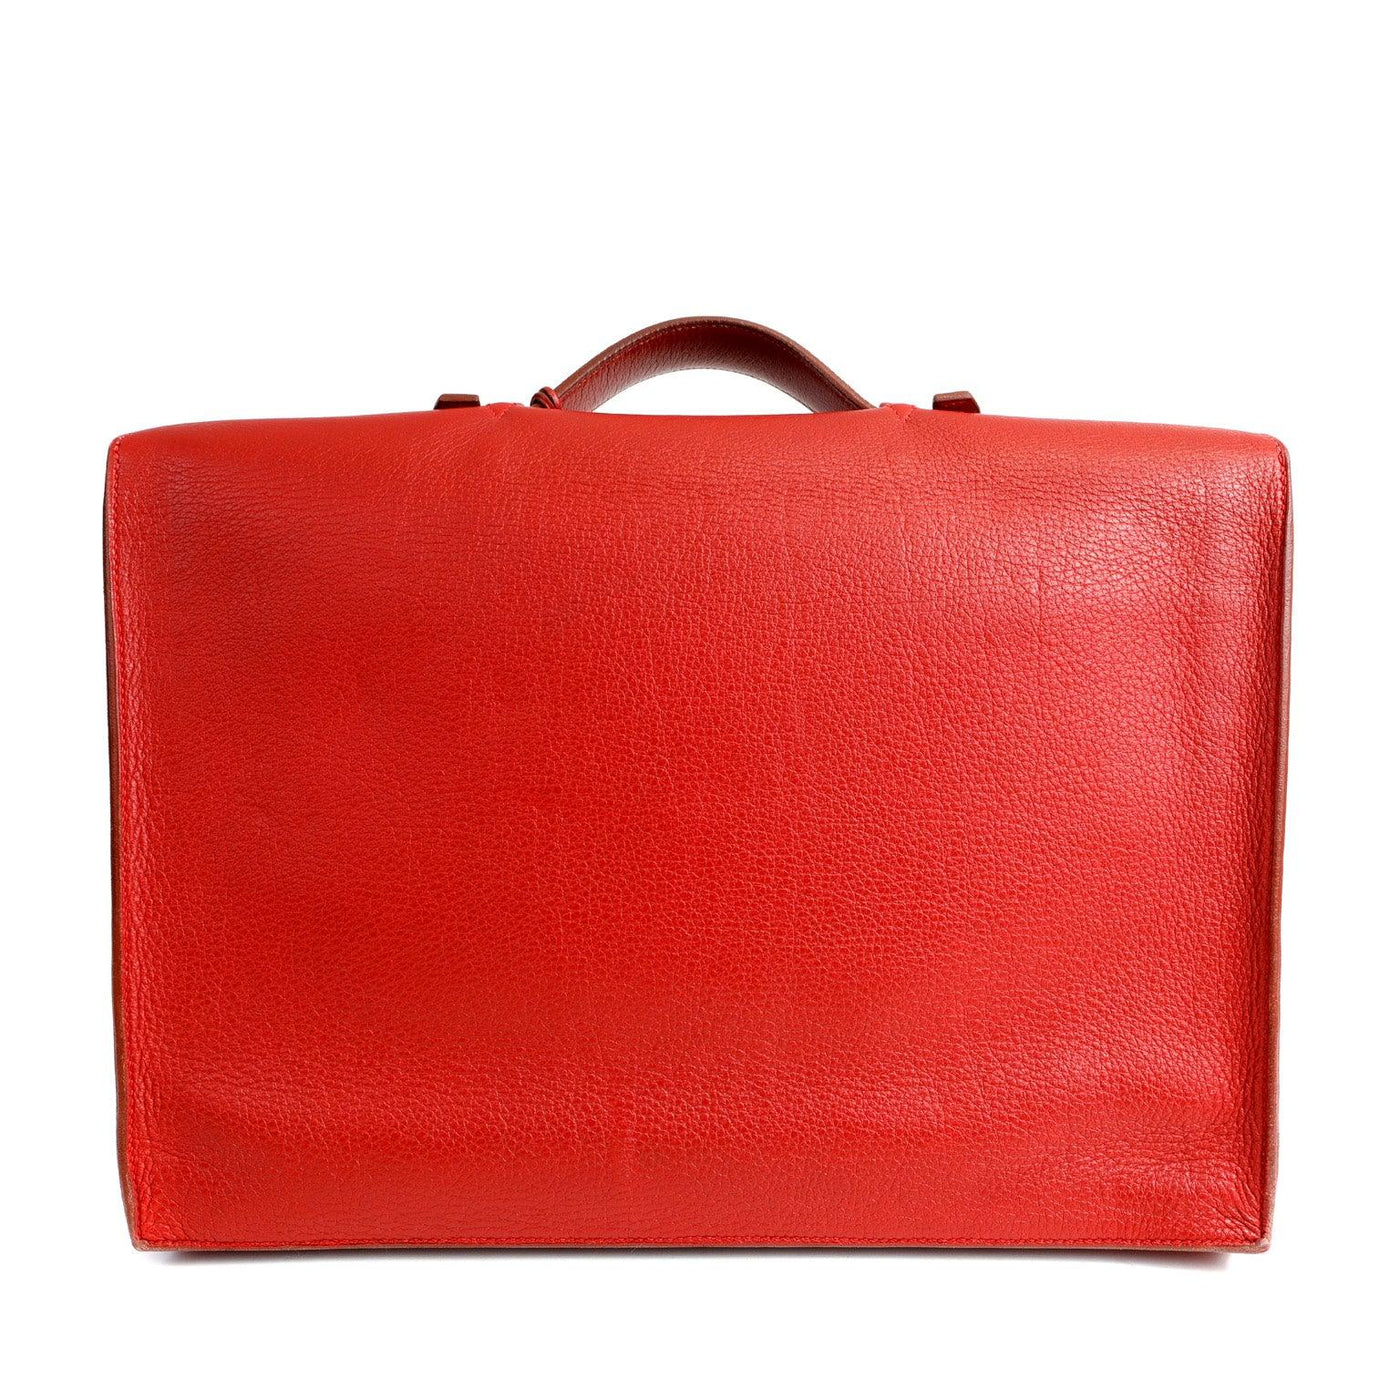 Hermès Red Togo Leather Briefcase - Only Authentics